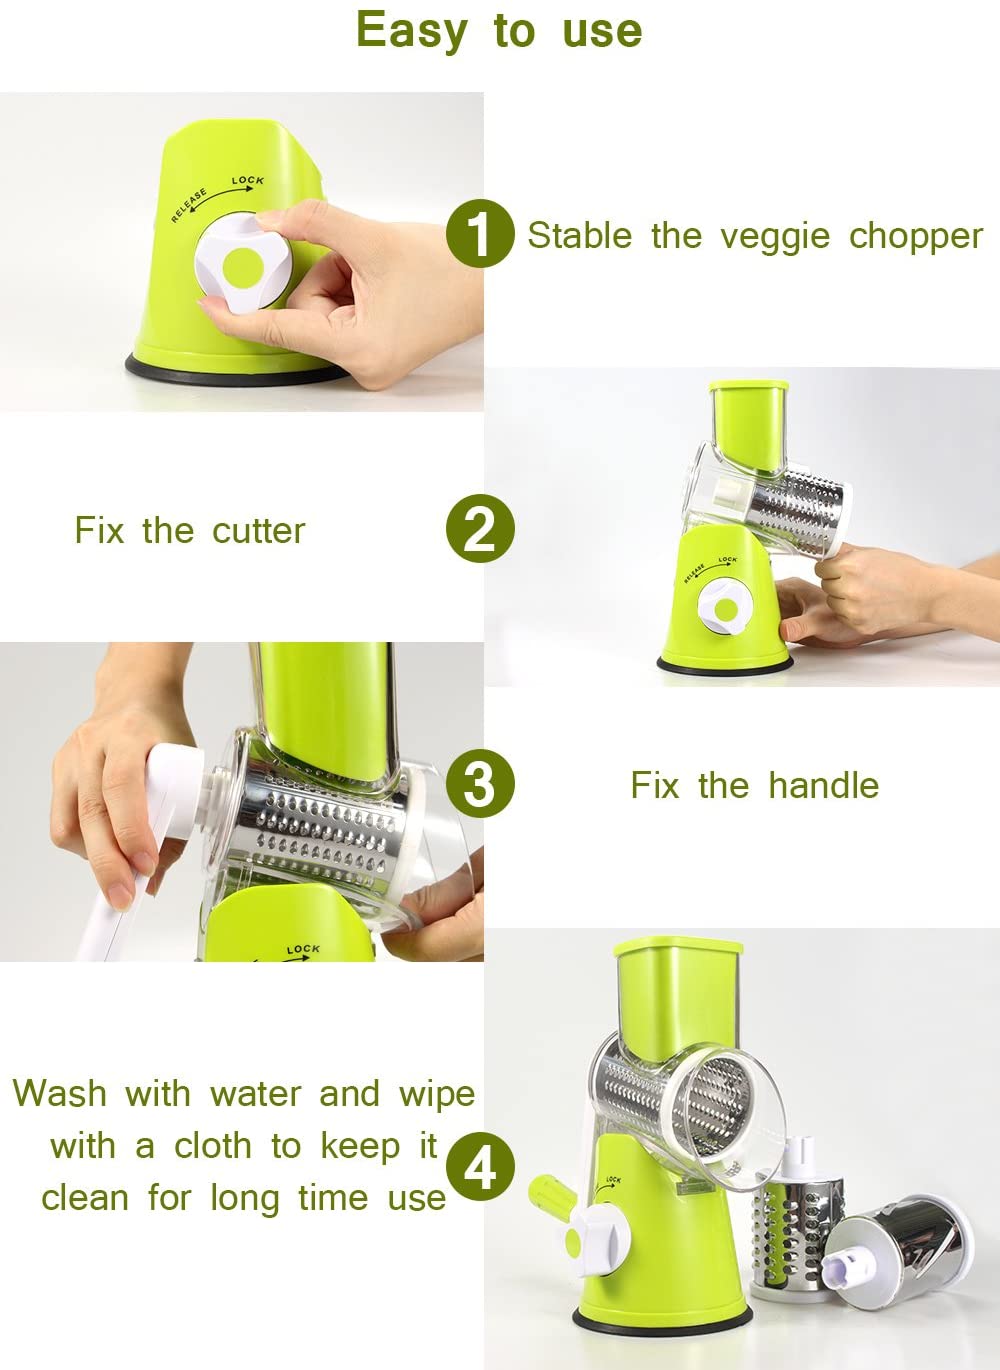 Multi-Functional Vegetable Cutter & Slicer(BUY 2 GET FREE SHIPPING)